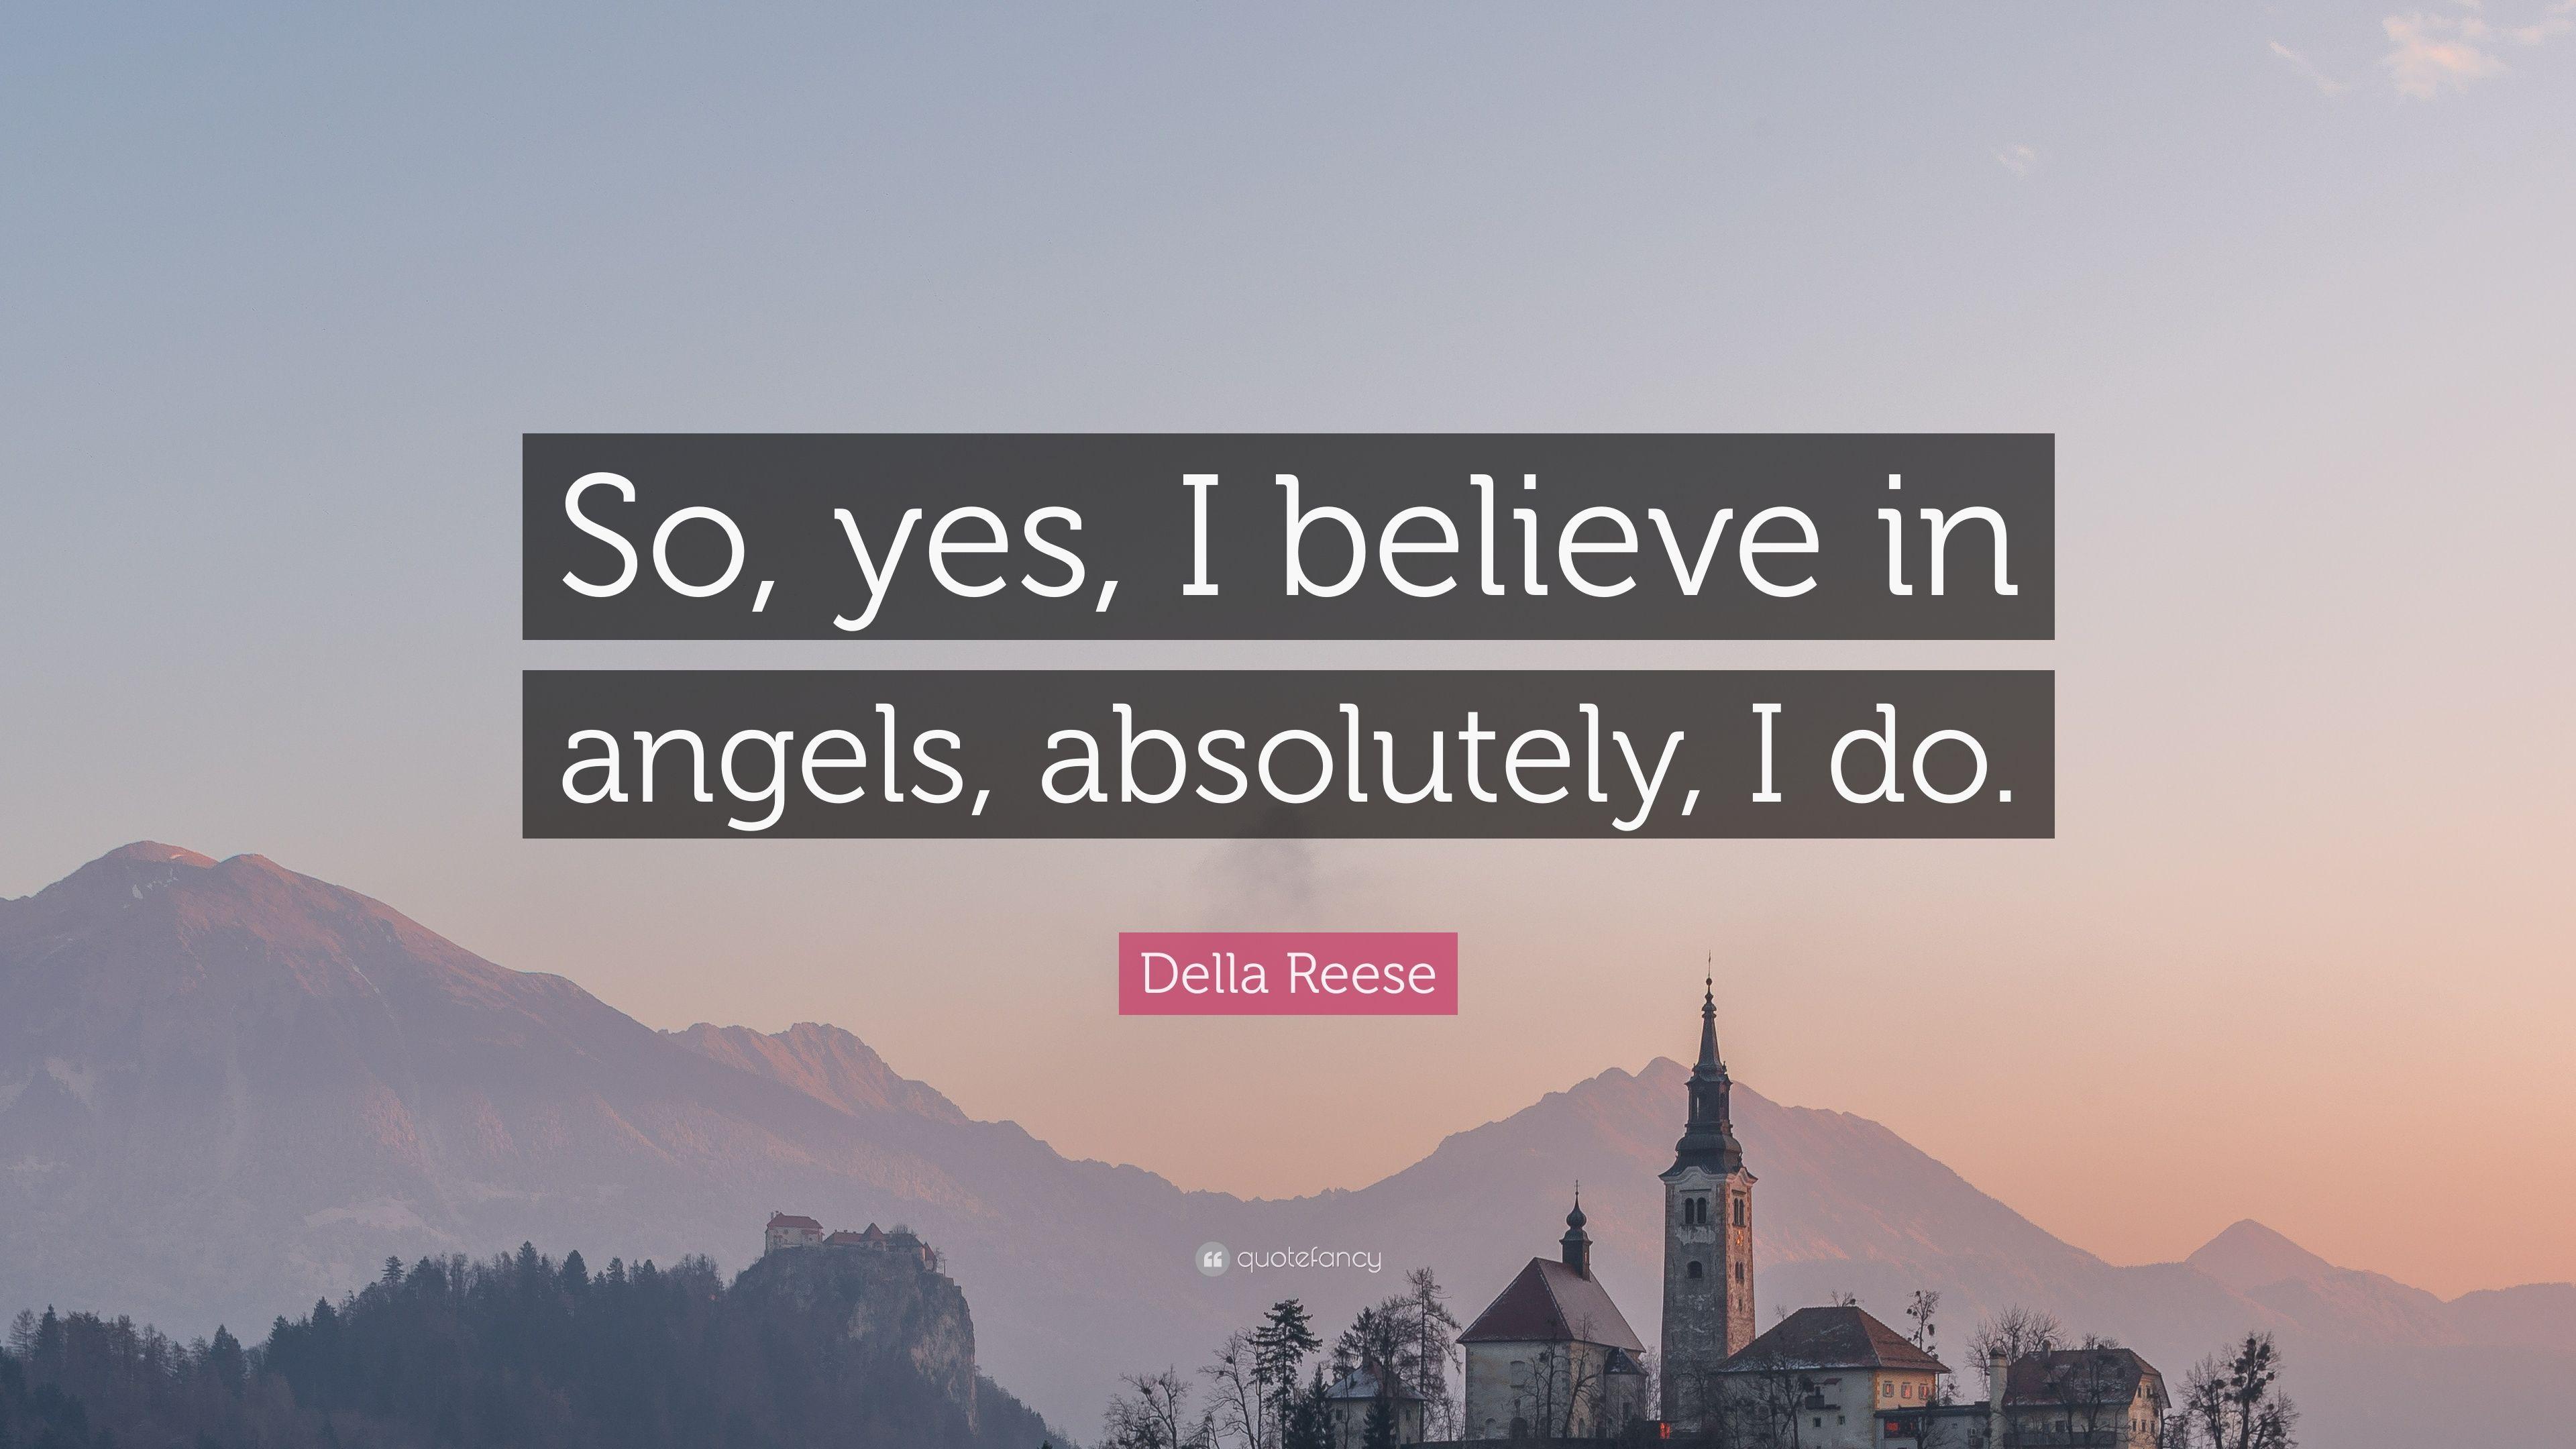 Della Reese Quote: “So, yes, I believe in angels, absolutely, I do